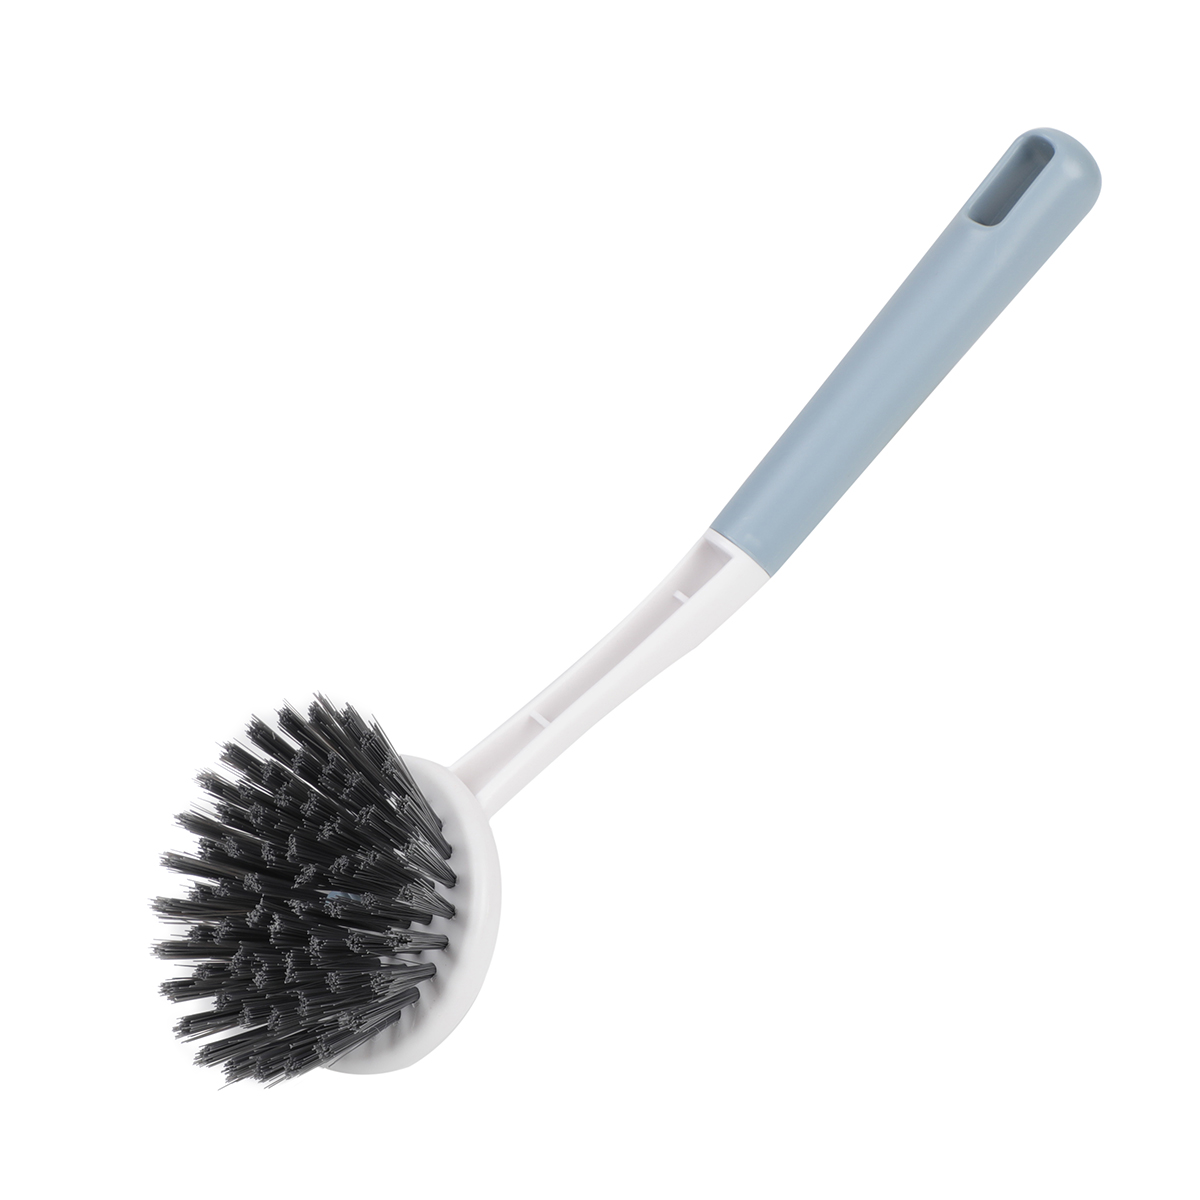 Dish Brush with Handle,Kitchen Scrub Brushes for Cleaning, Dish Scrubber with Stiff Bristles for Pots, Pans,Sink